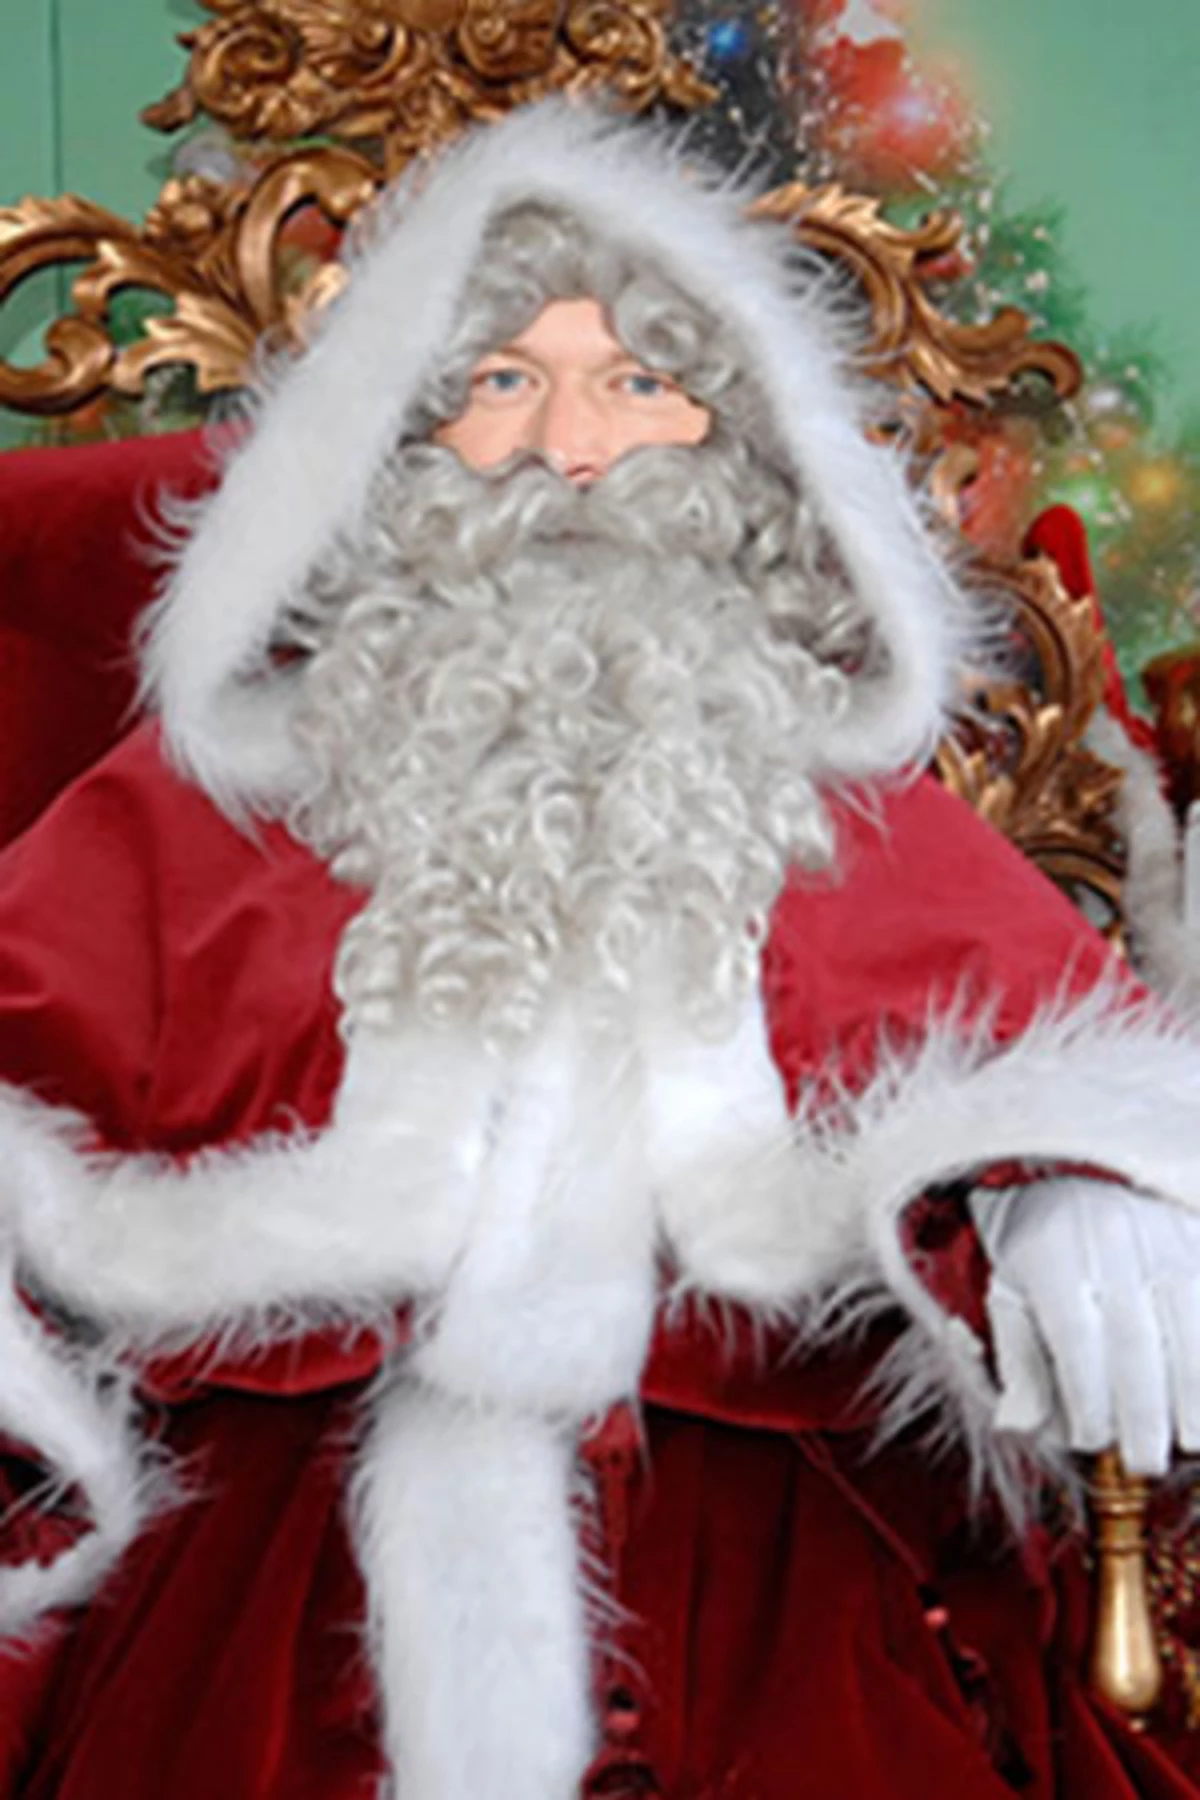 Can You Guess This Country Santa Claus?